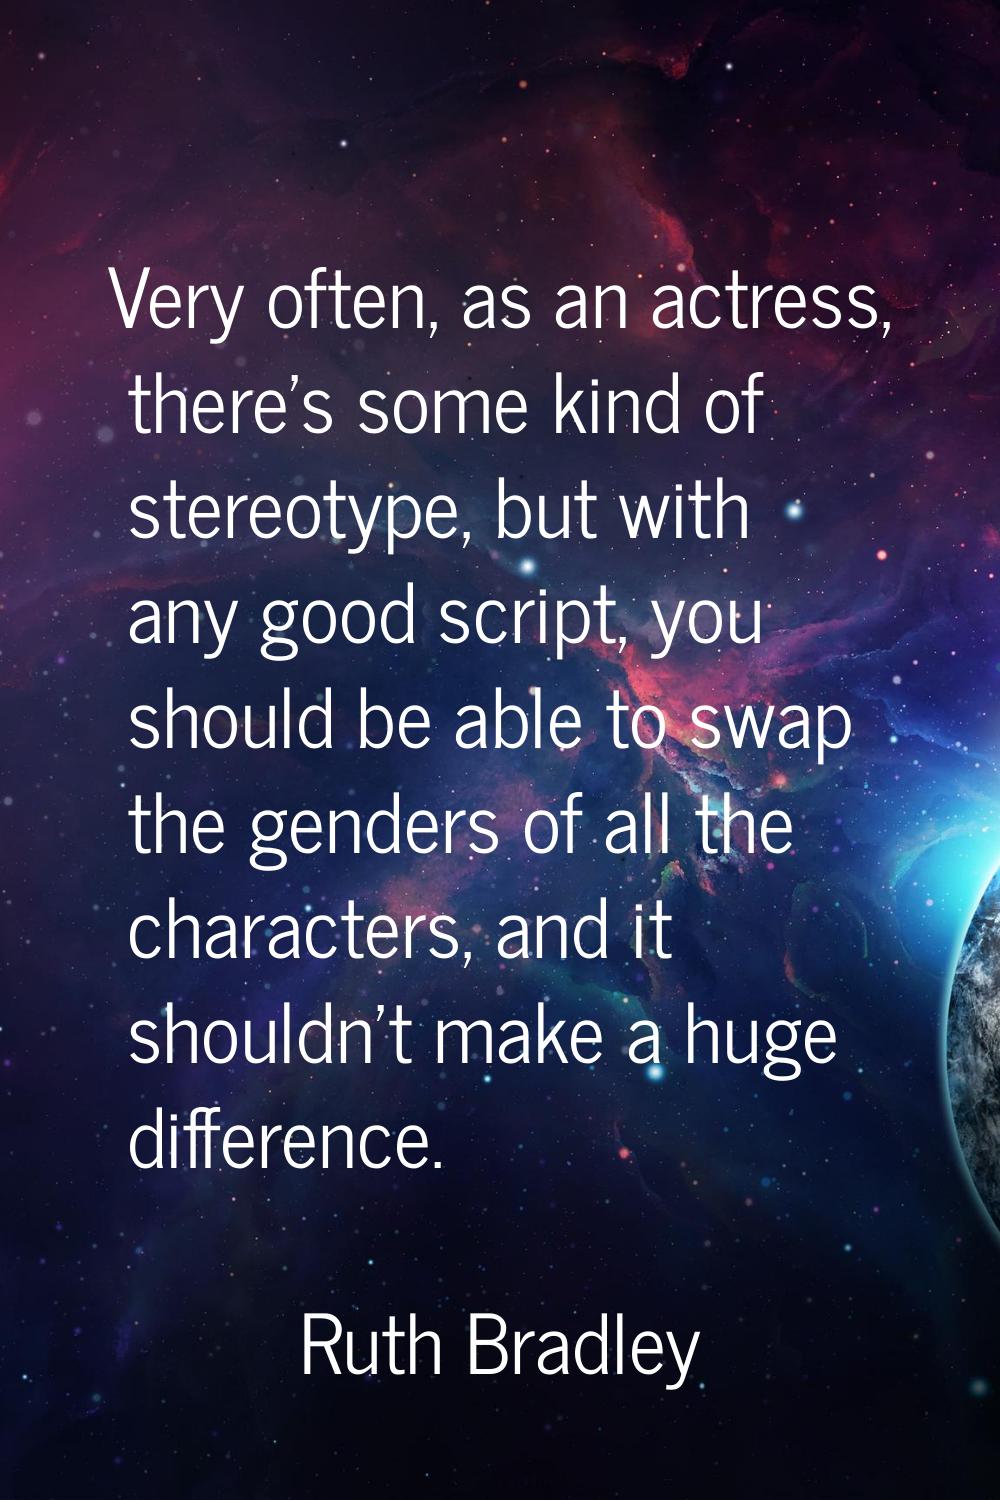 Very often, as an actress, there's some kind of stereotype, but with any good script, you should be